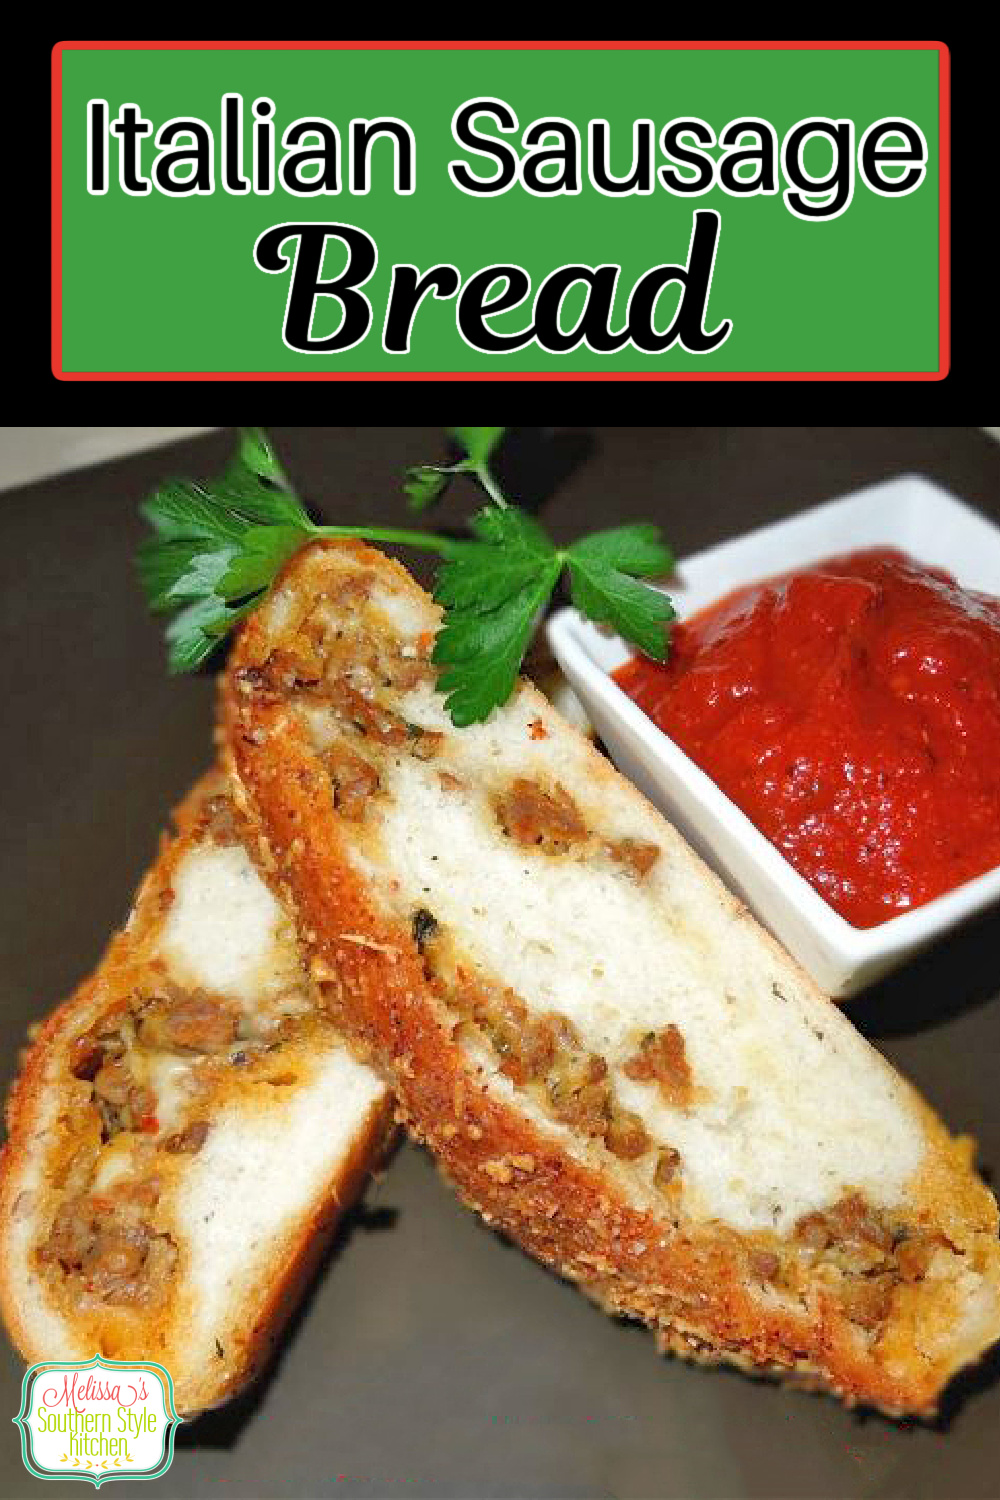 This made-from-scratch bread is filled with Italian sausage and a 3 cheese blend that takes it over the top #italianbread #Italiansausagebread #Italiansausage #bread #breadrecipes #cheesebread #3cheesebread #southernrecipes #southernfood via @melissasssk